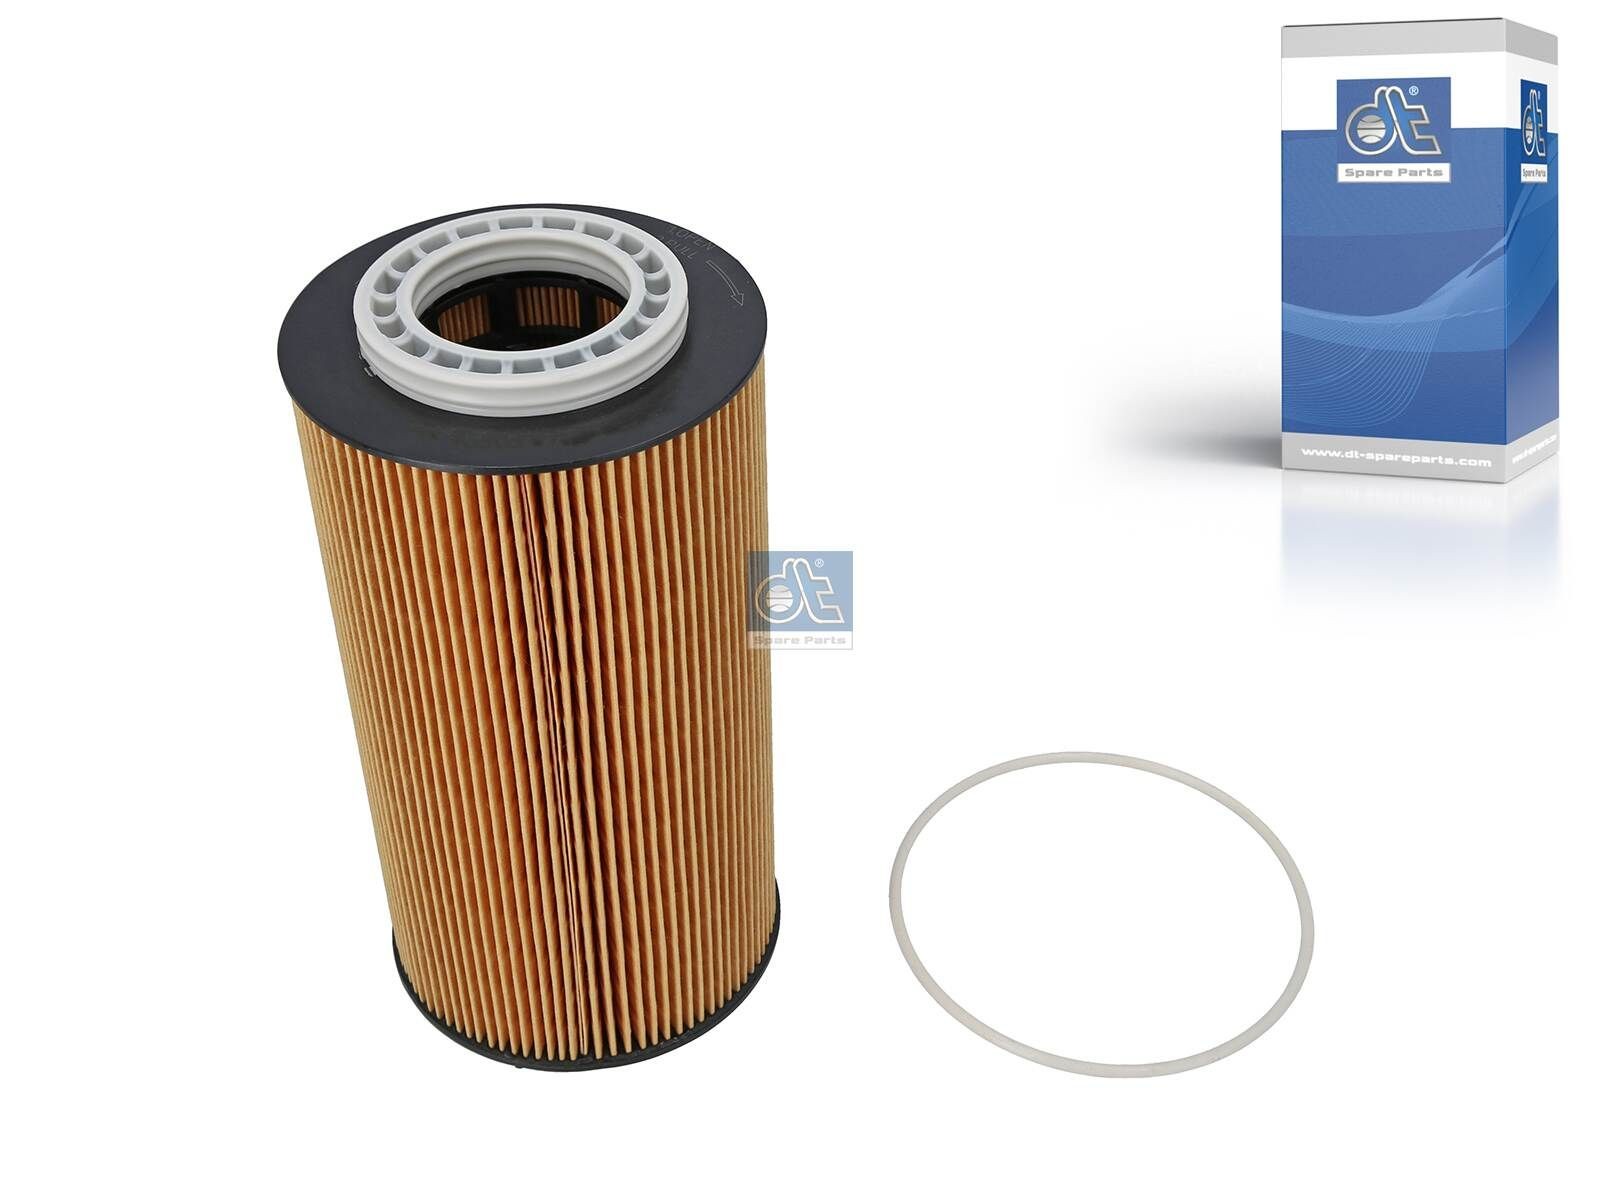 F 026 407 201 DT Spare Parts 3.18611 Oil filter 51 05501 0011